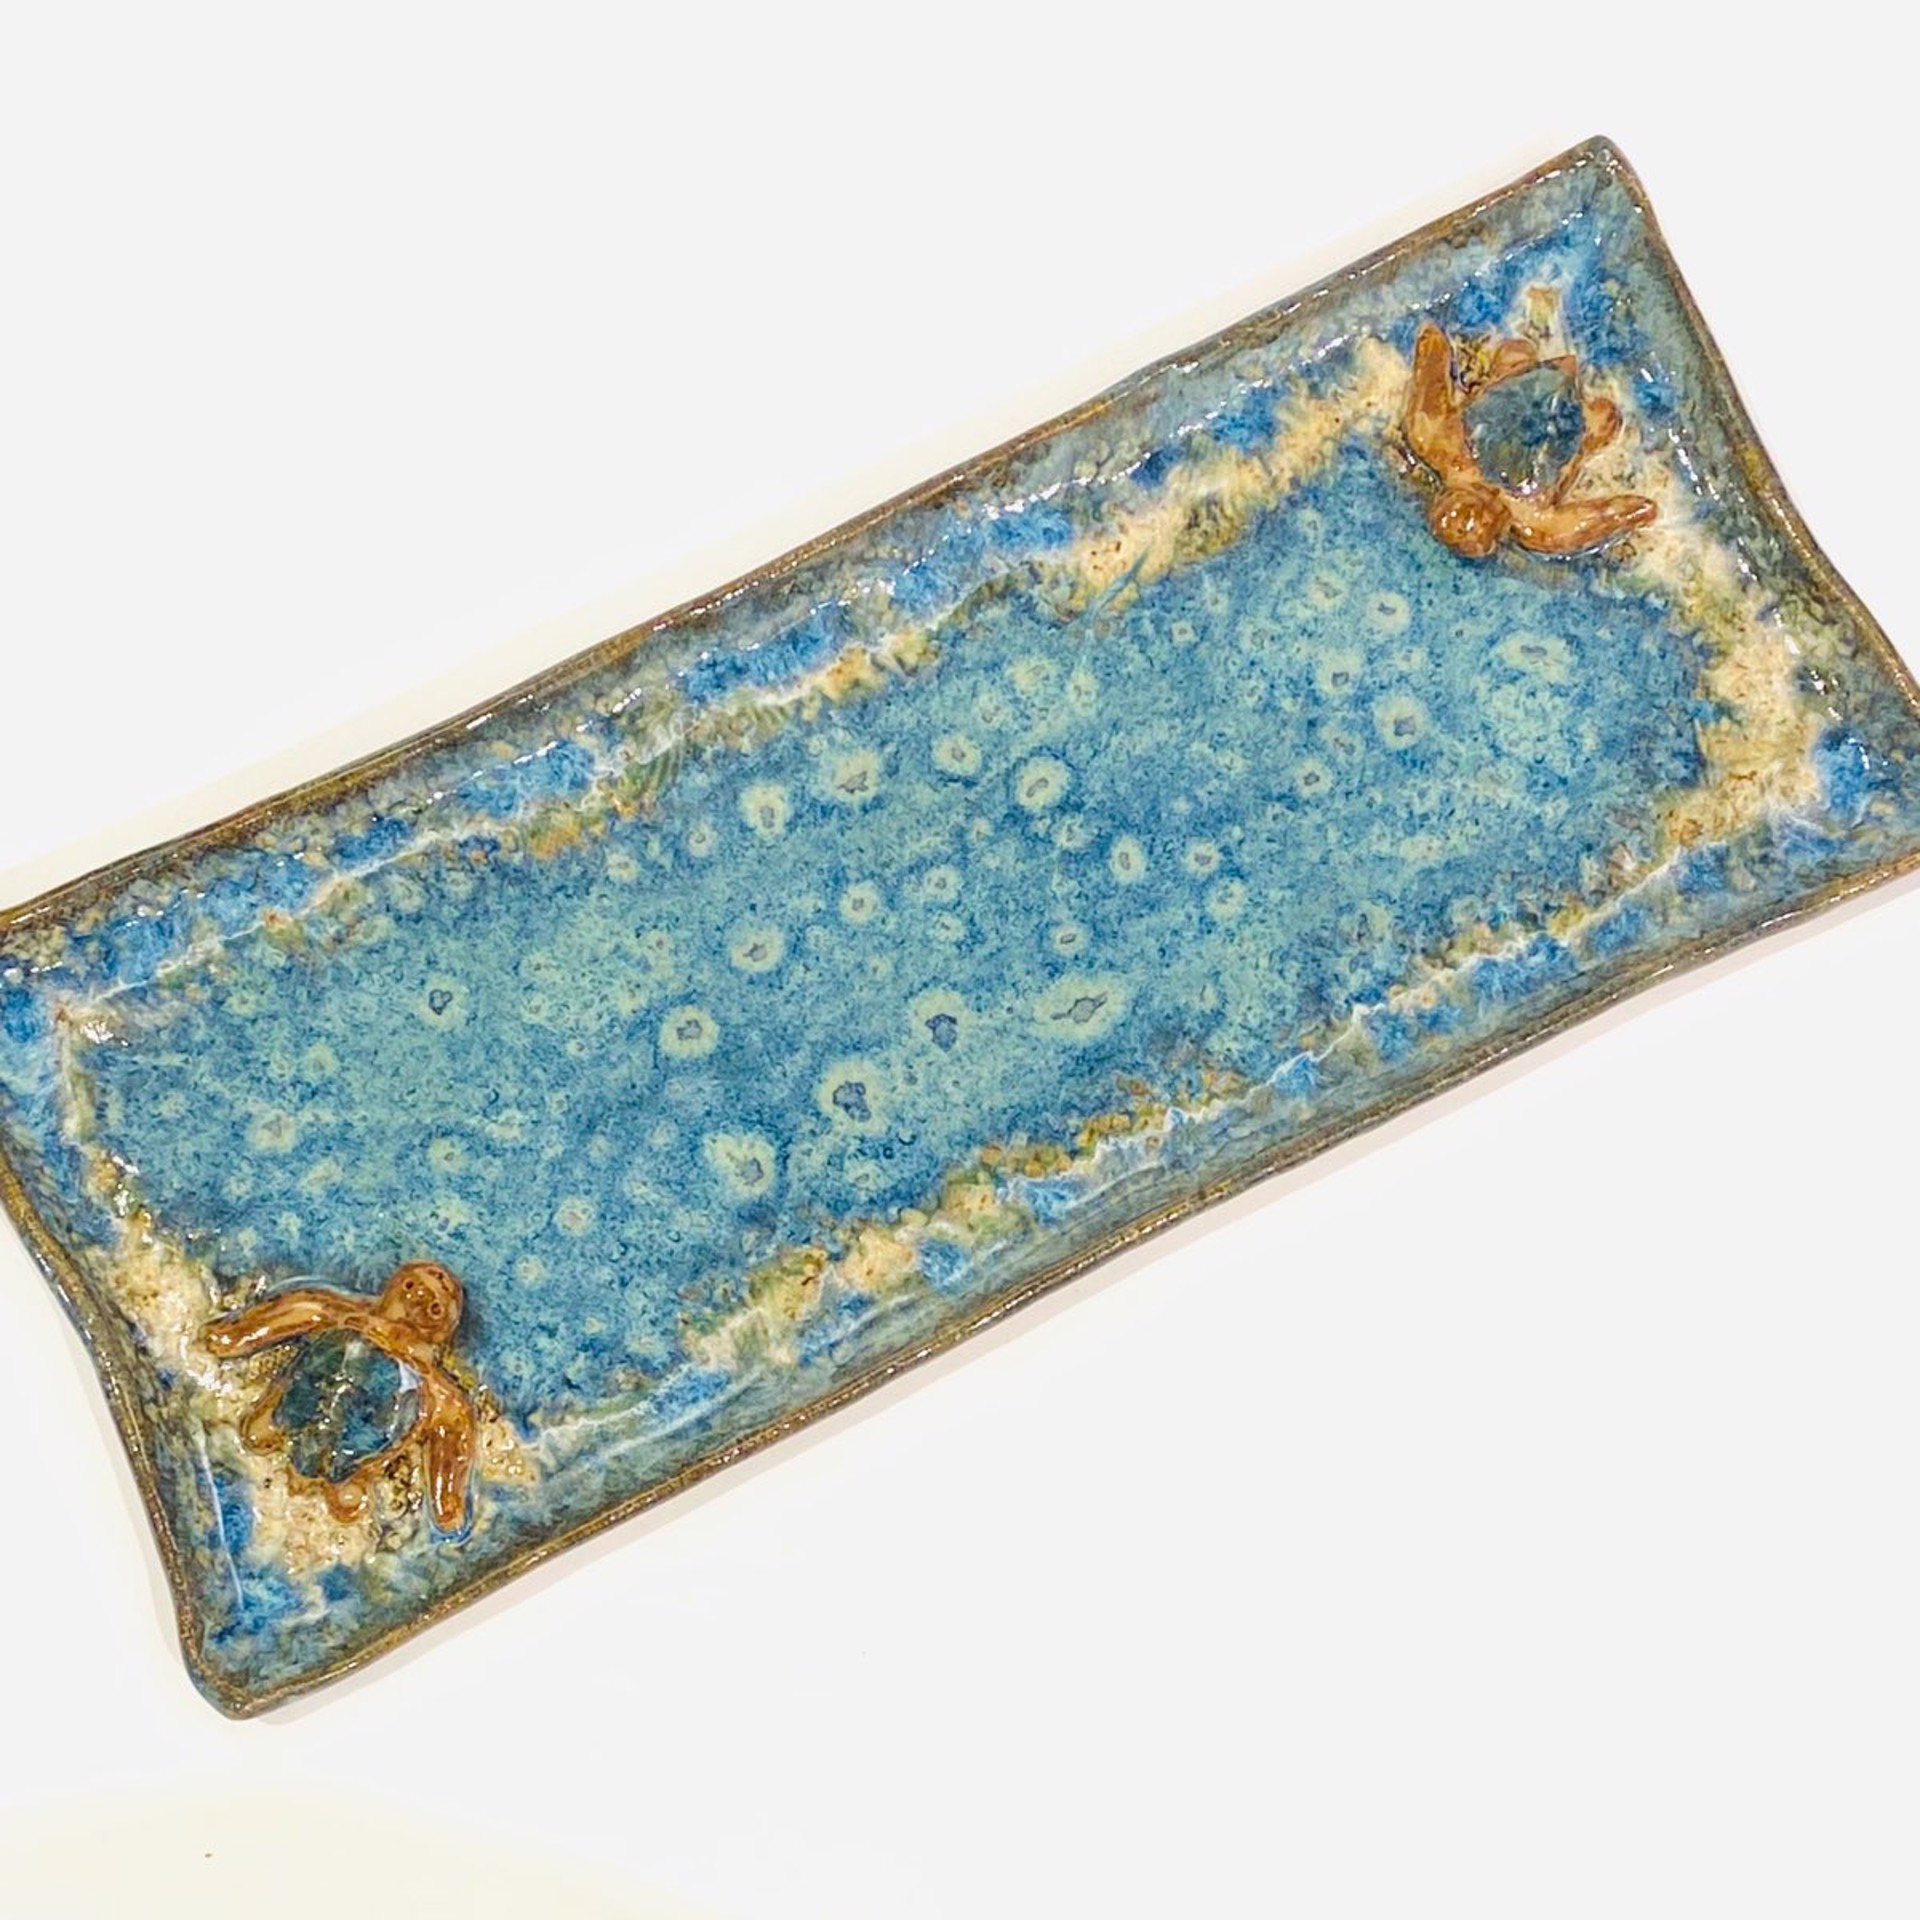 LG22-940 Rectangle Plate with 2 Turtles (Blue Glaze) by Jim & Steffi Logan